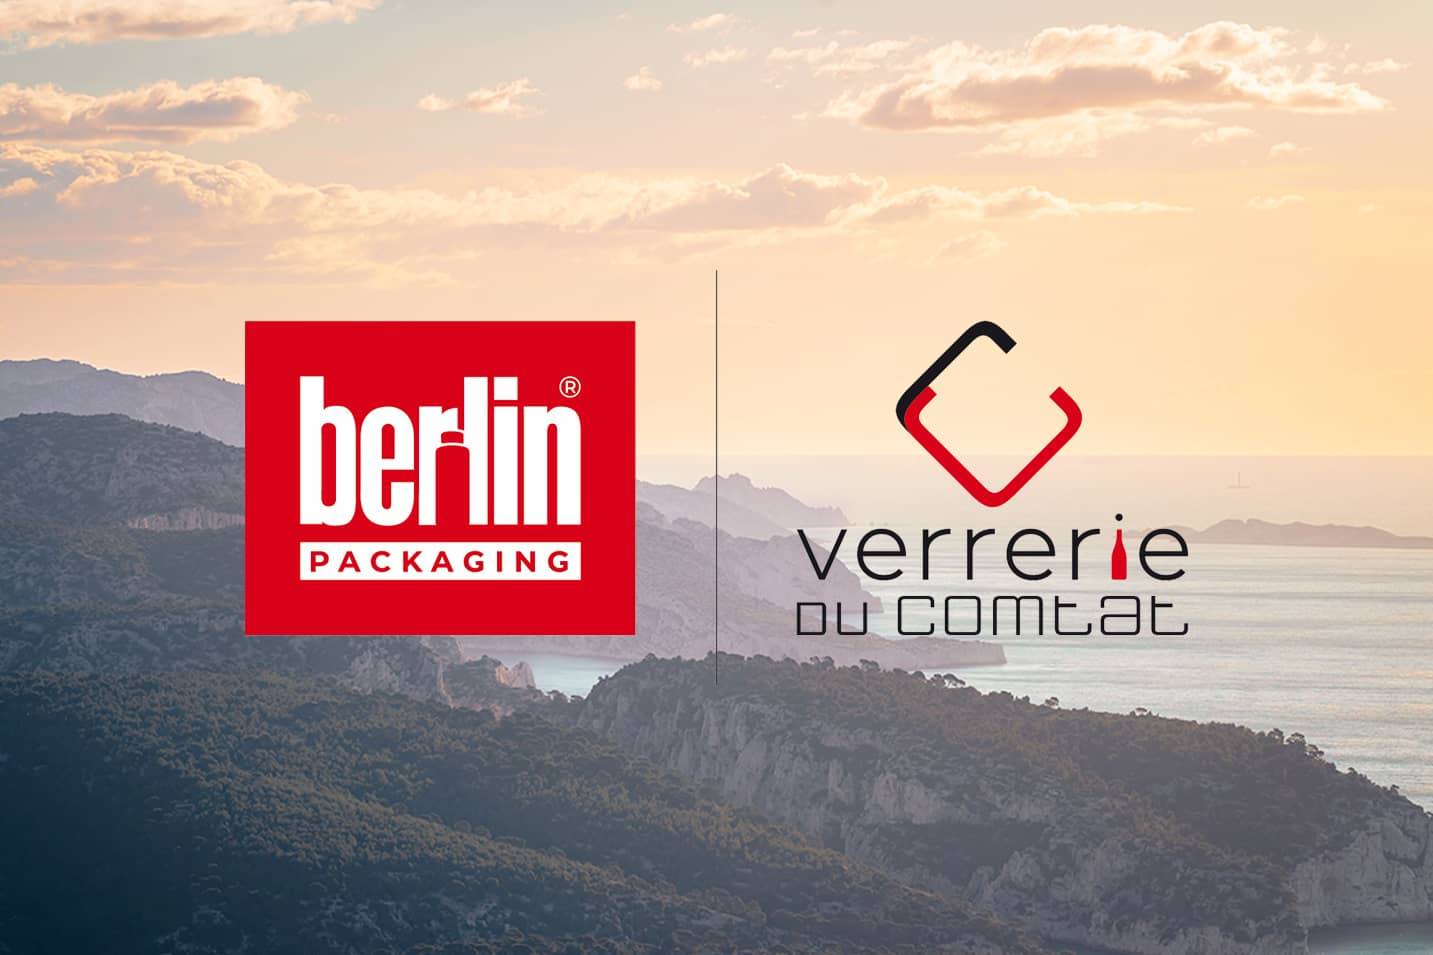 Berlin Packaging Continues Rapid Expansion in France with the Acquisition of Verrerie du Comtat